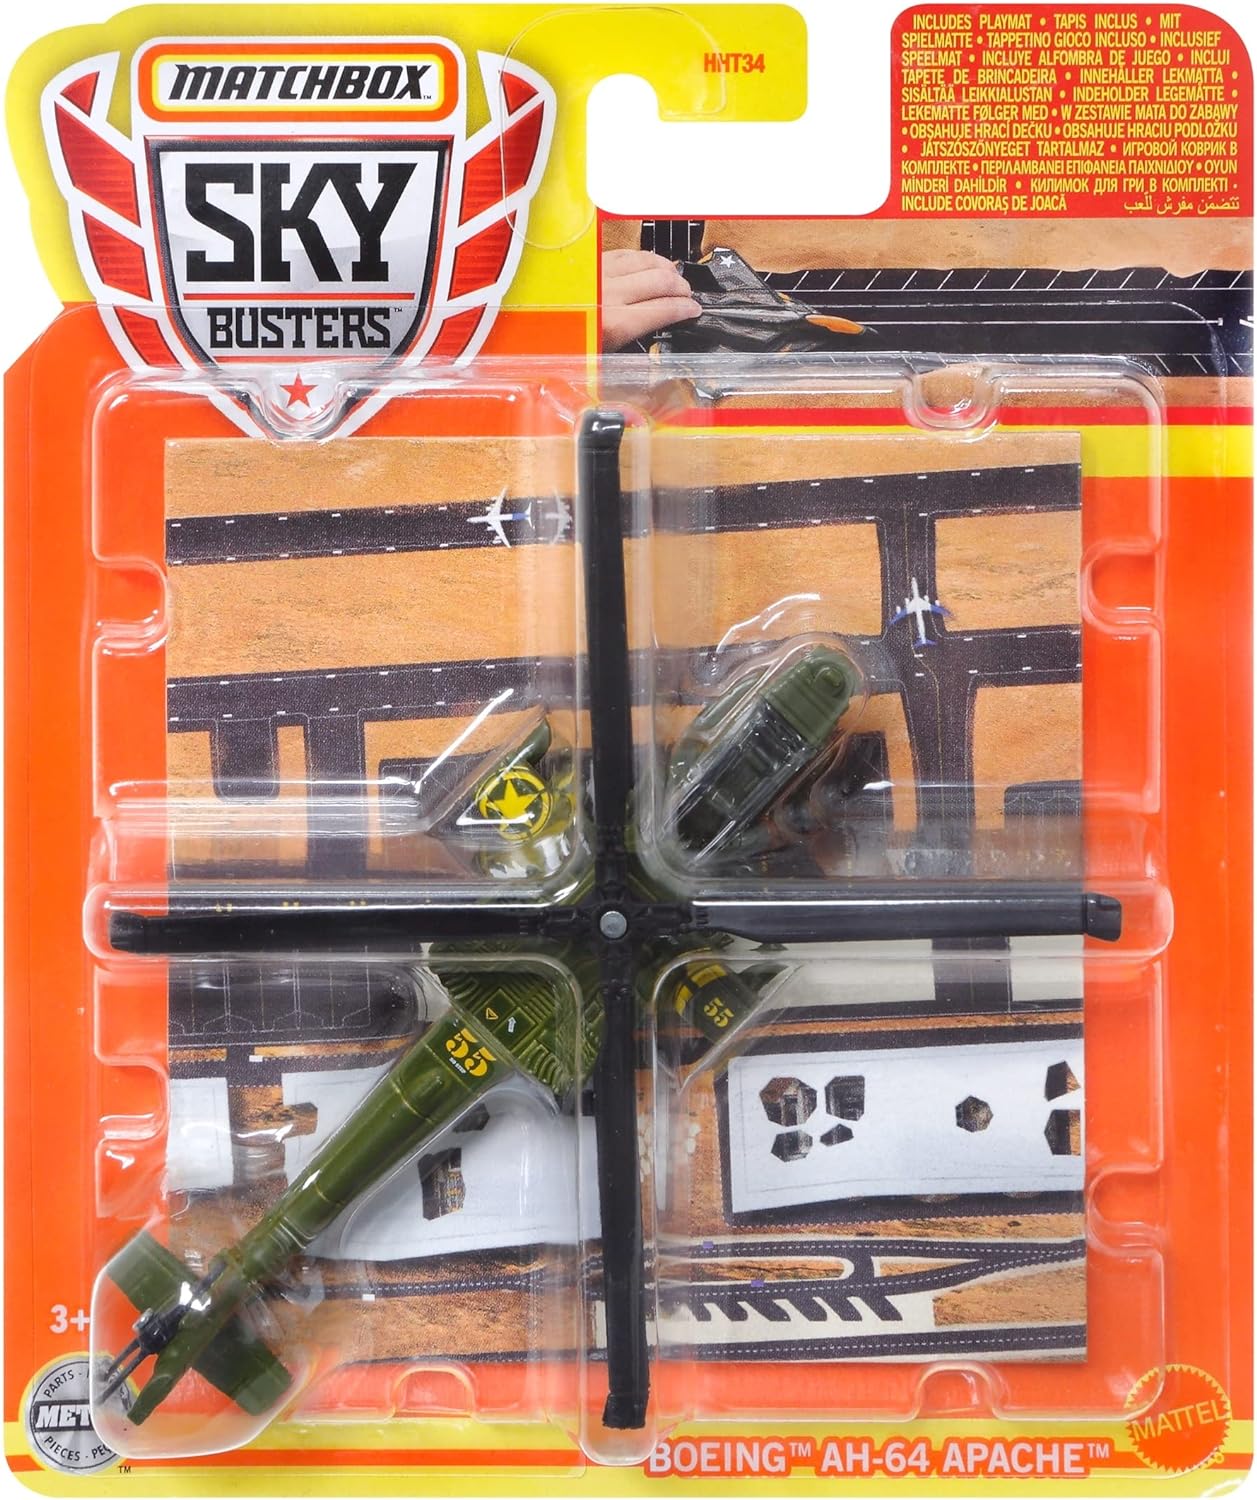 Matchbox Sky Busters Commercial Airliner Playset with Playmat (Styles Vary)